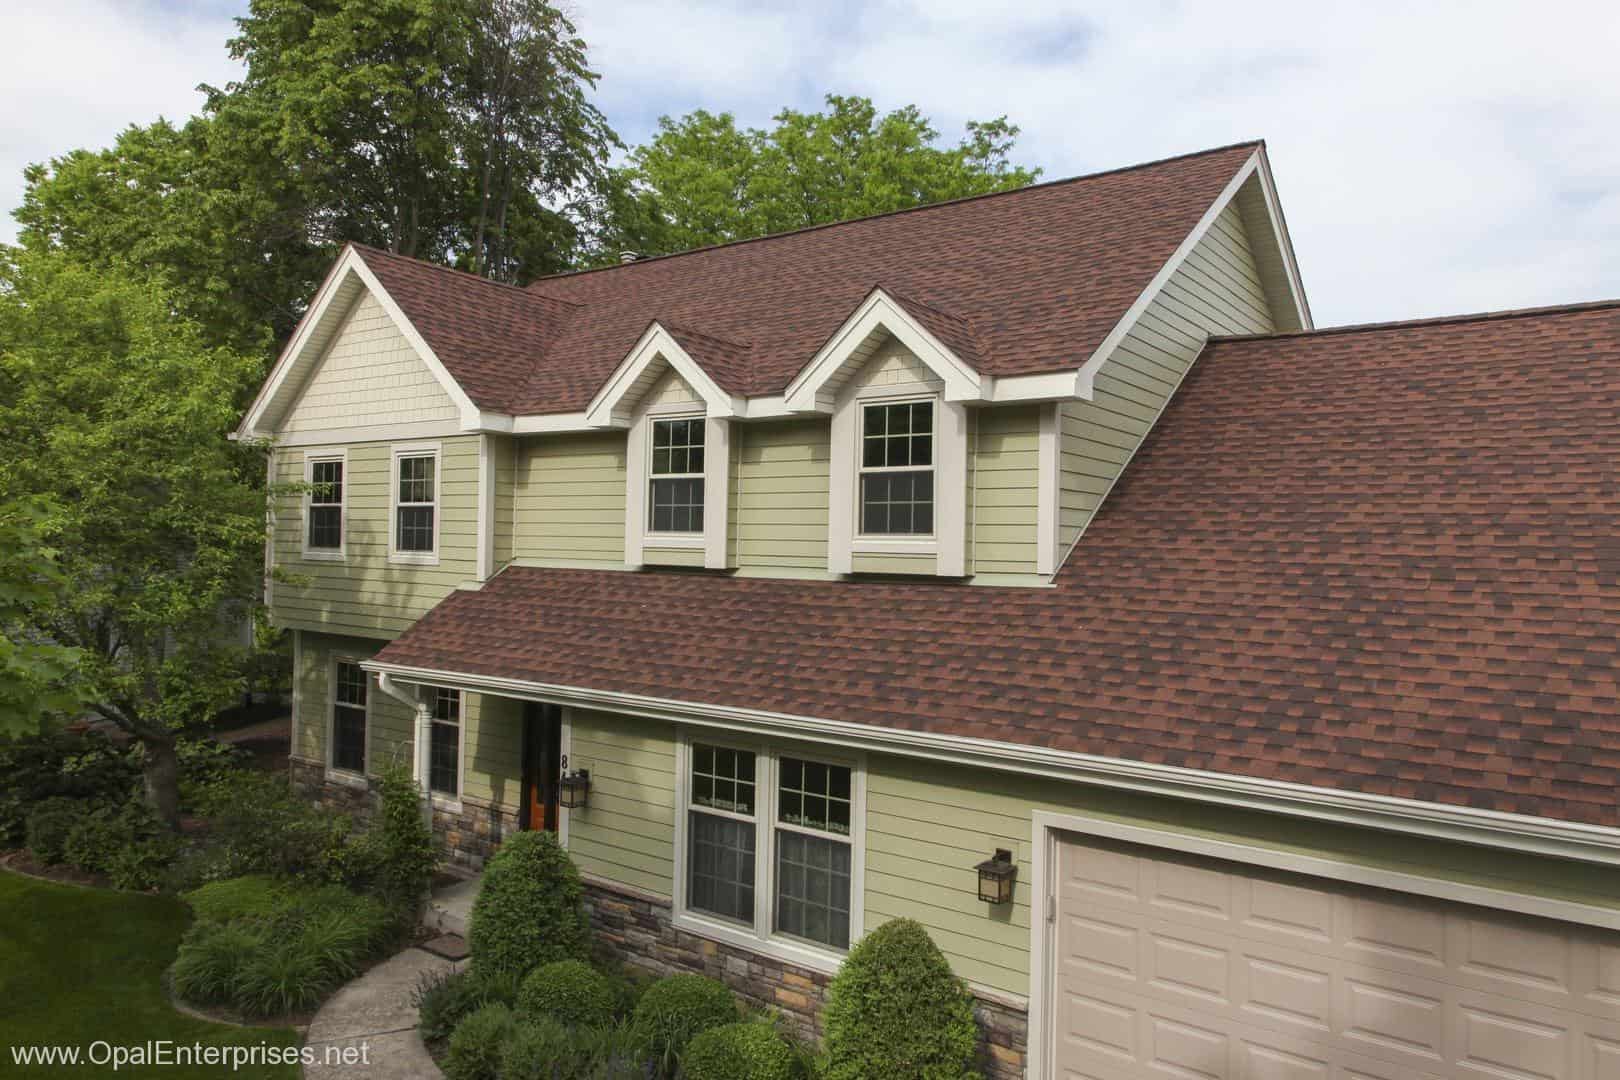 House in Naperville with GAF roof & James Hardie Siding installed by Opal Enterprises. #OpalCurbAppeal #OpalEnterprises